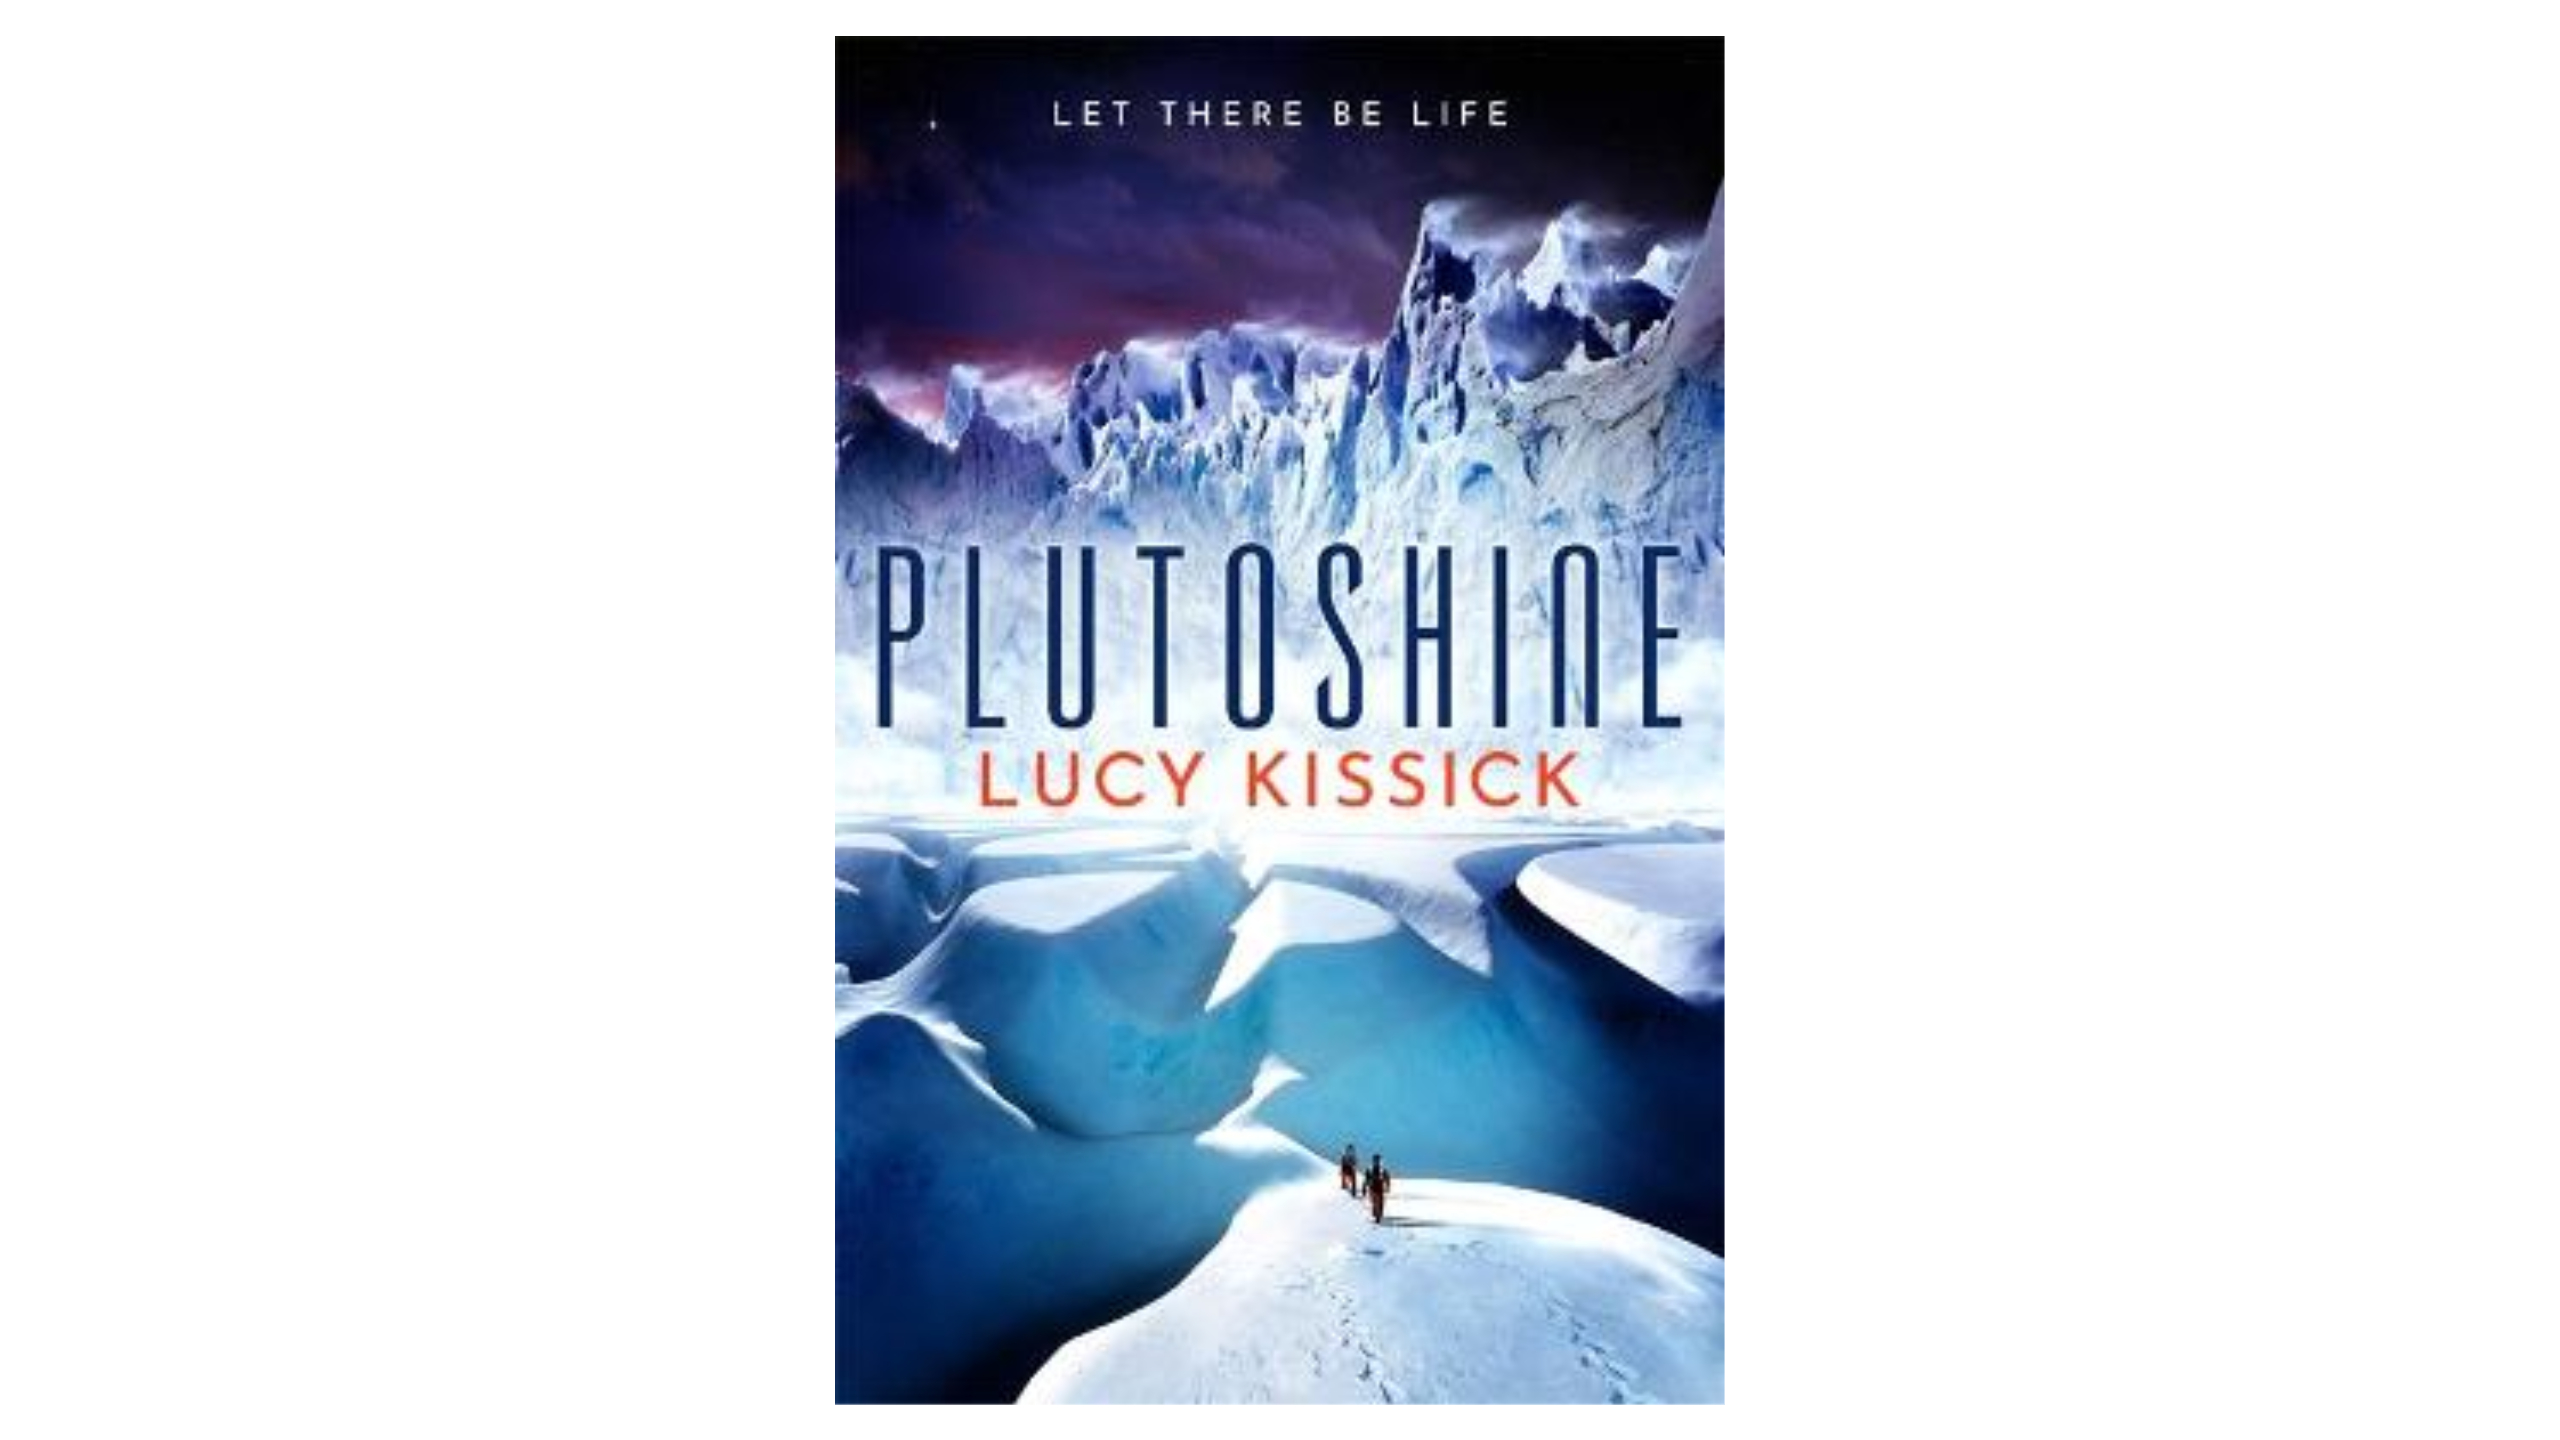 The cover of the book Plutoshine by Lucy Kissick